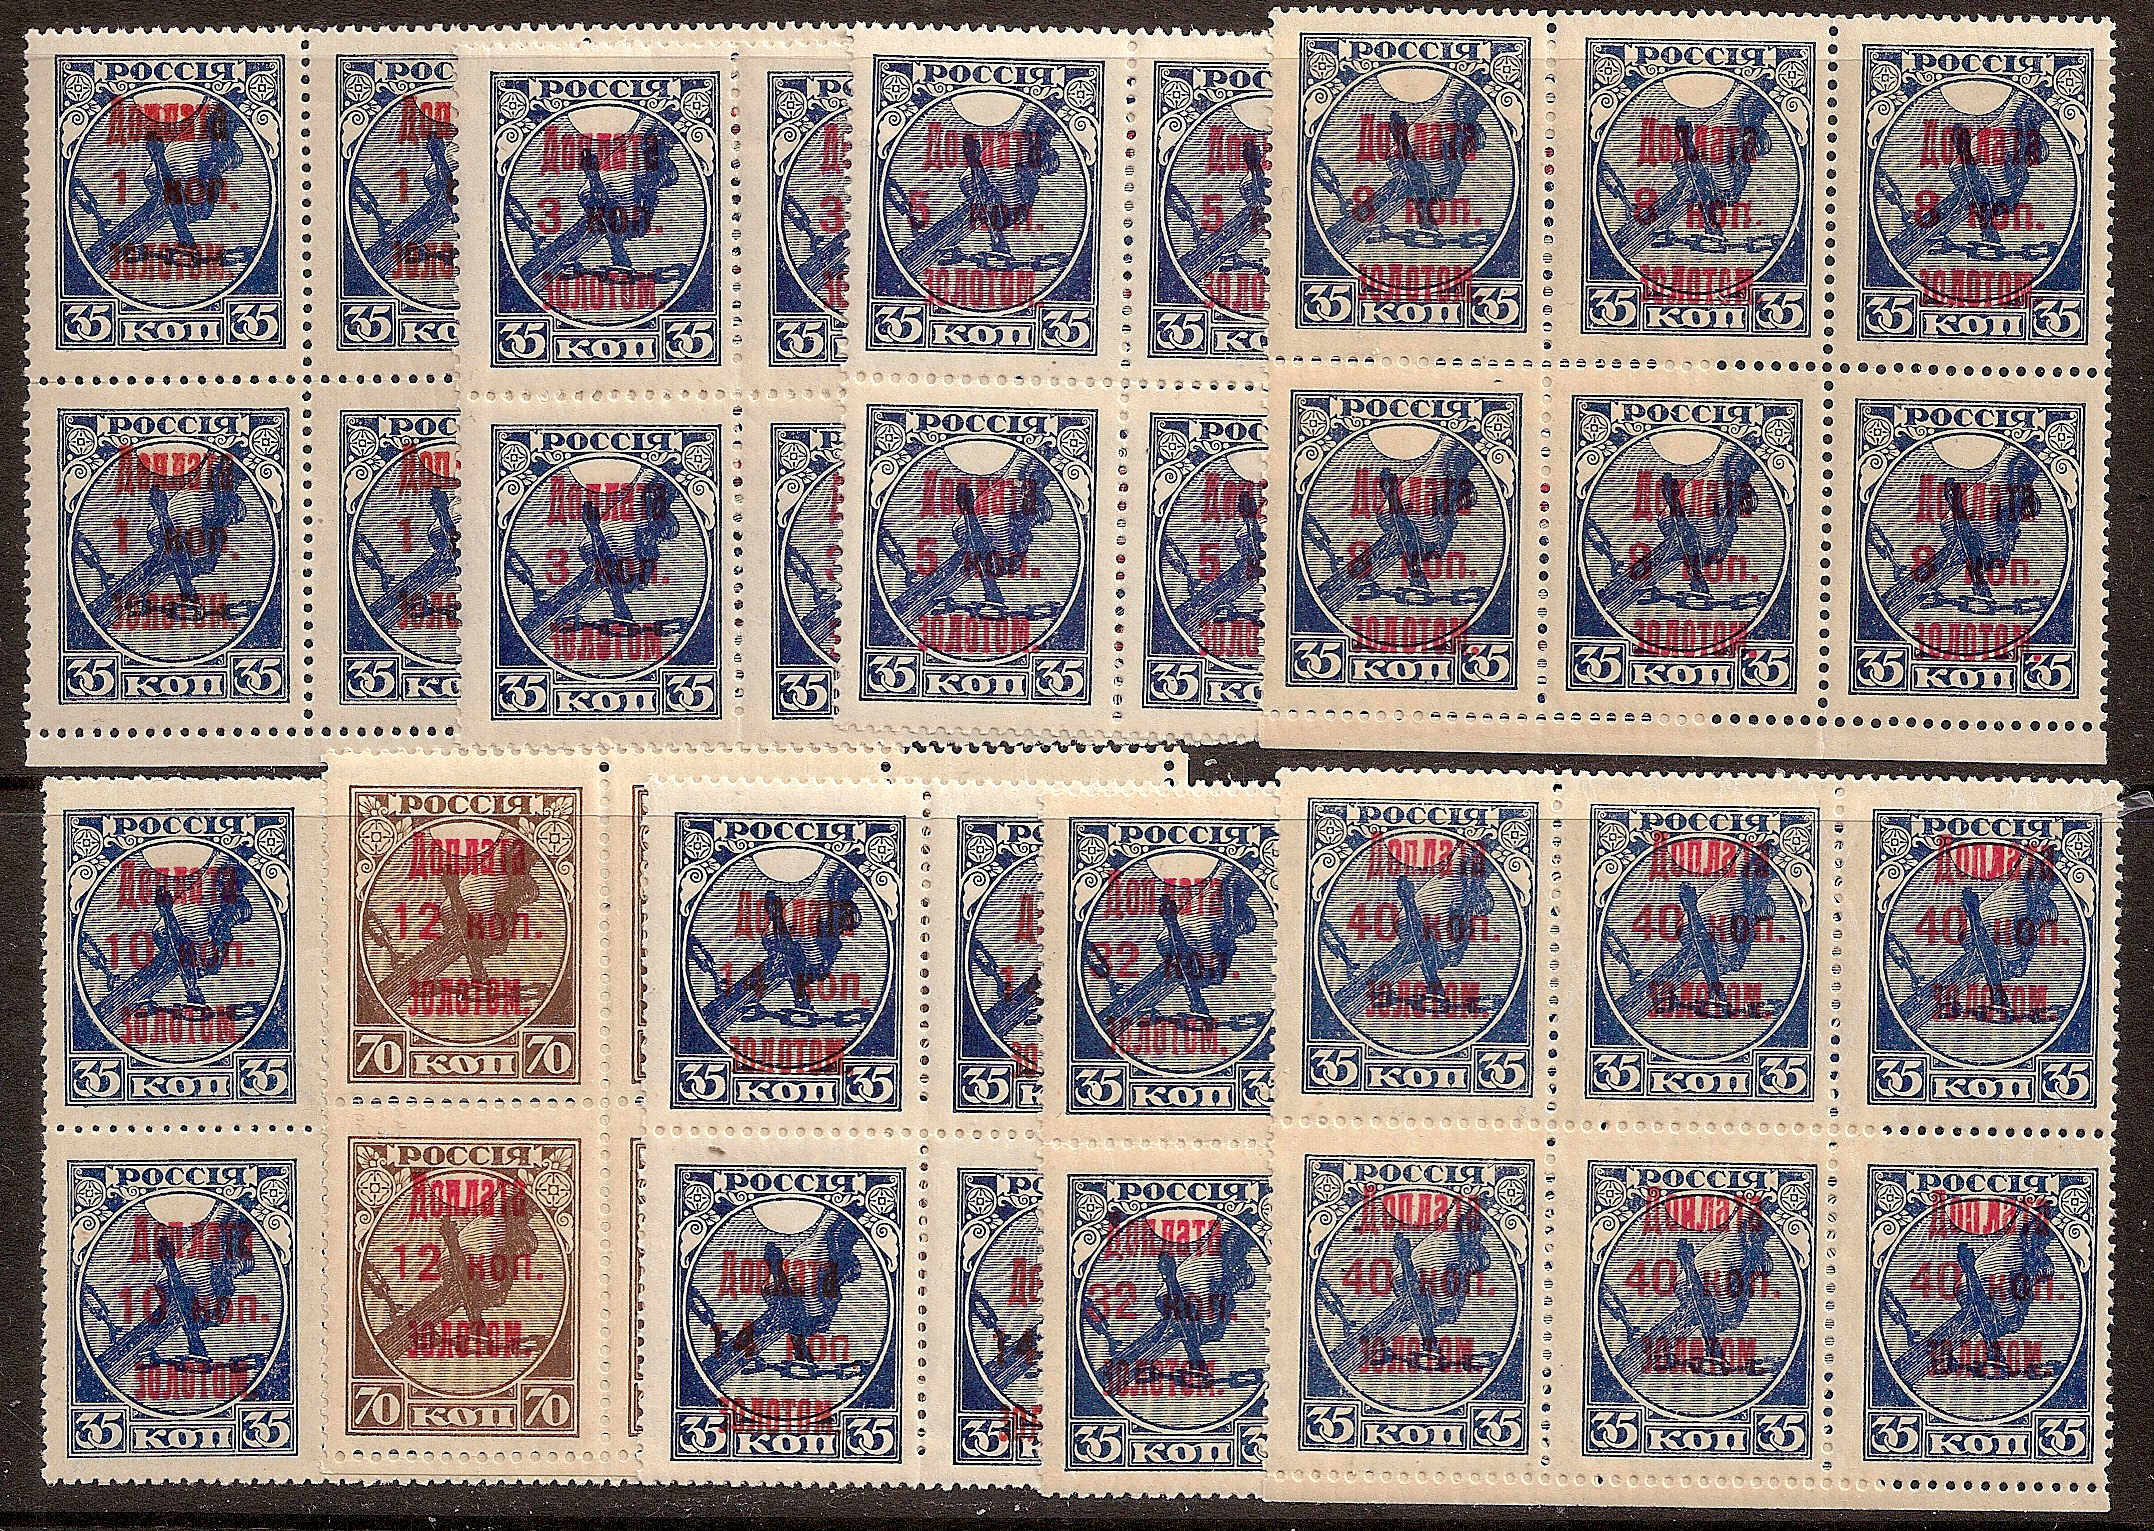 PRussia Specialized - ostage Dues Postage Dues Scott J1-9 